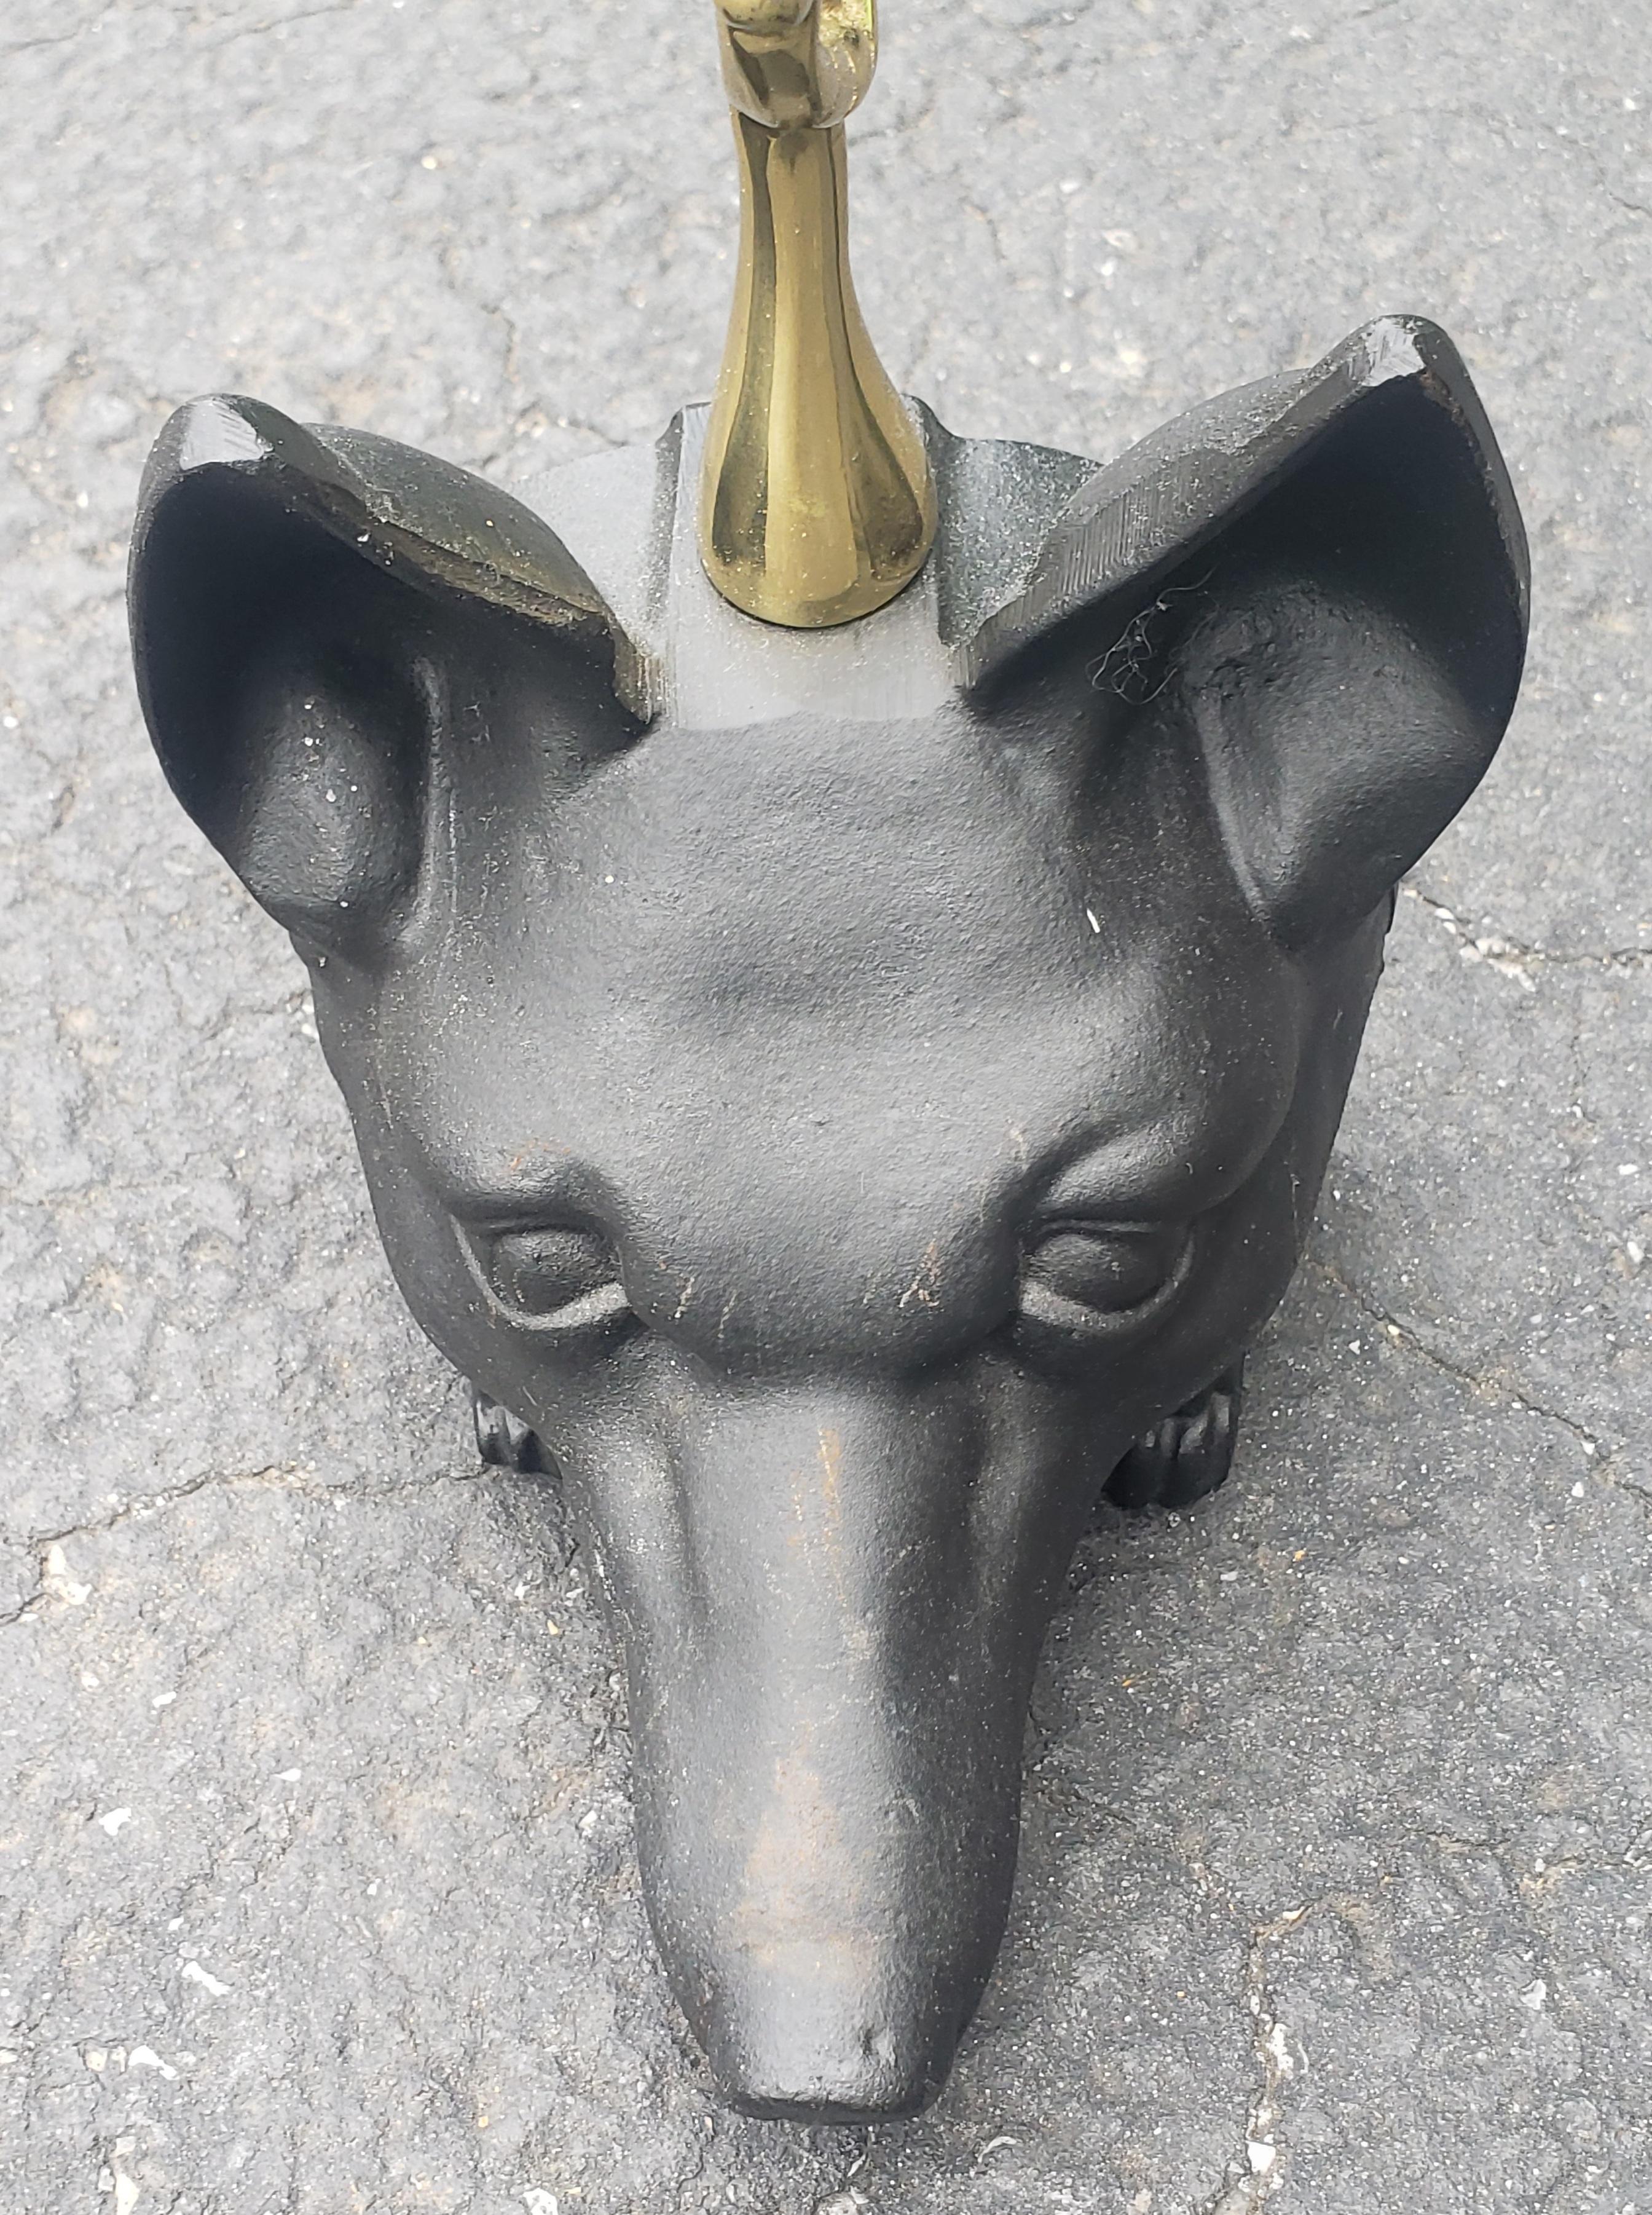 Brass and Iron Door Stop with Fox Head and Riding Crop In Good Condition For Sale In Germantown, MD